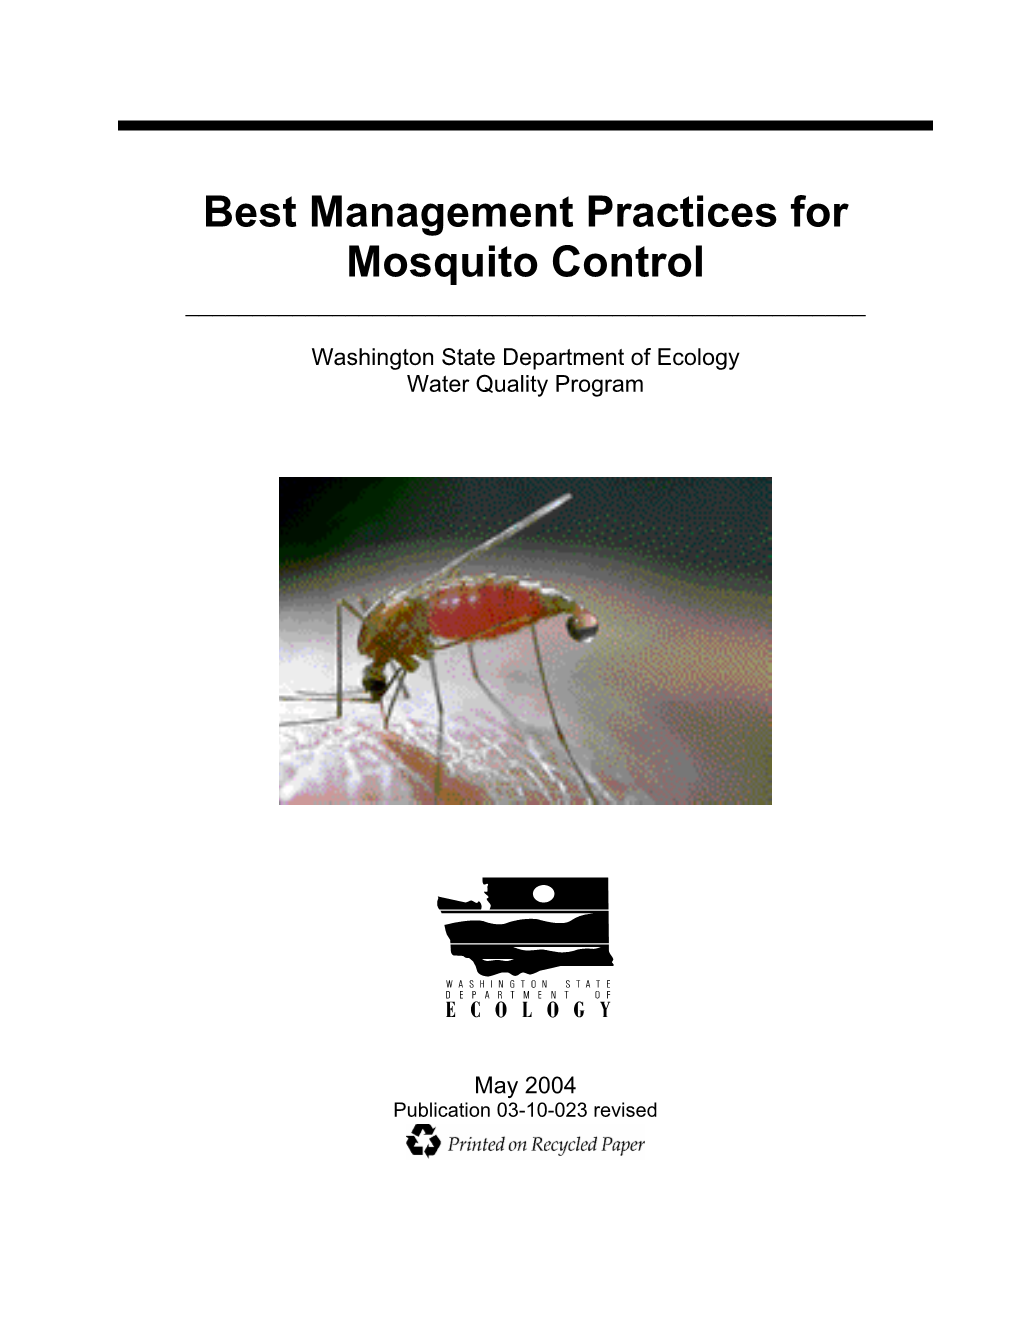 Best Management Practices for Mosquito Control ______